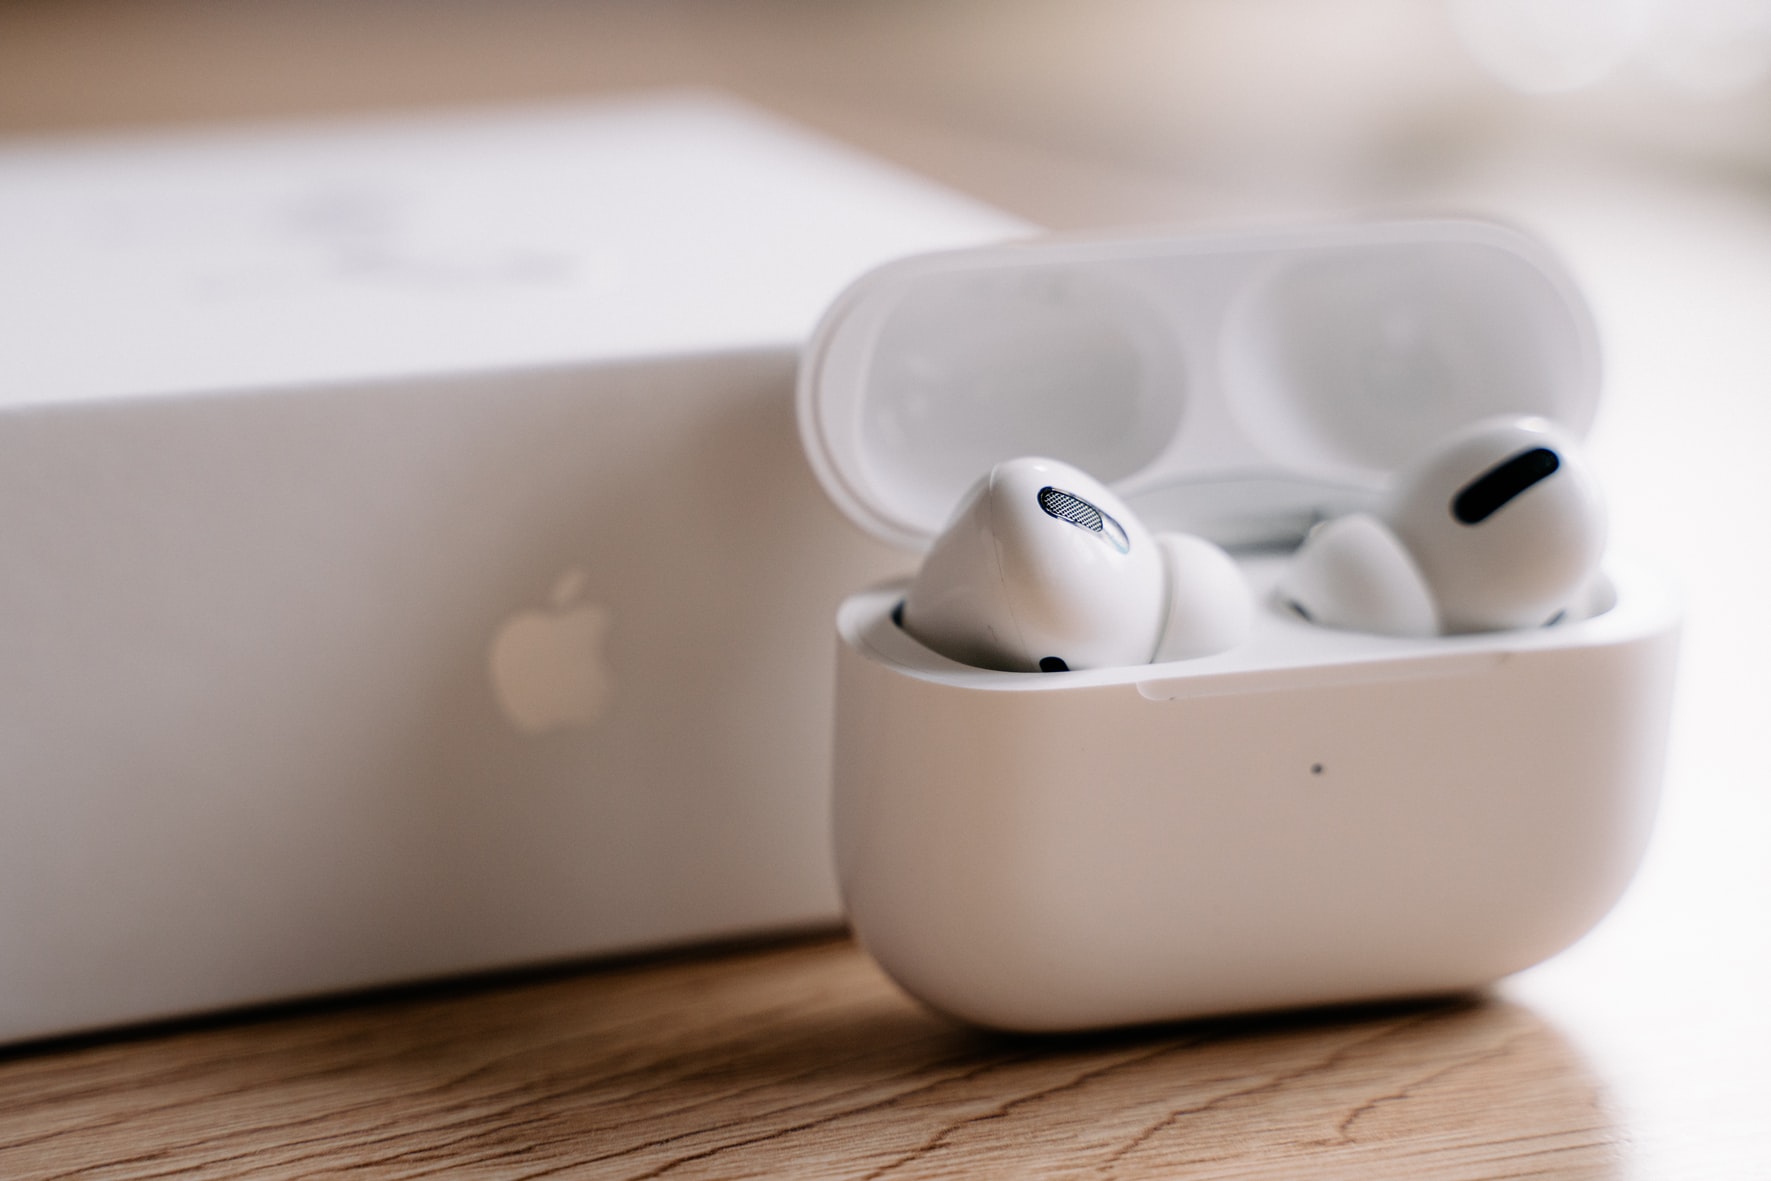 Technology company Apple may launch AirPods case with built-in touchscreen